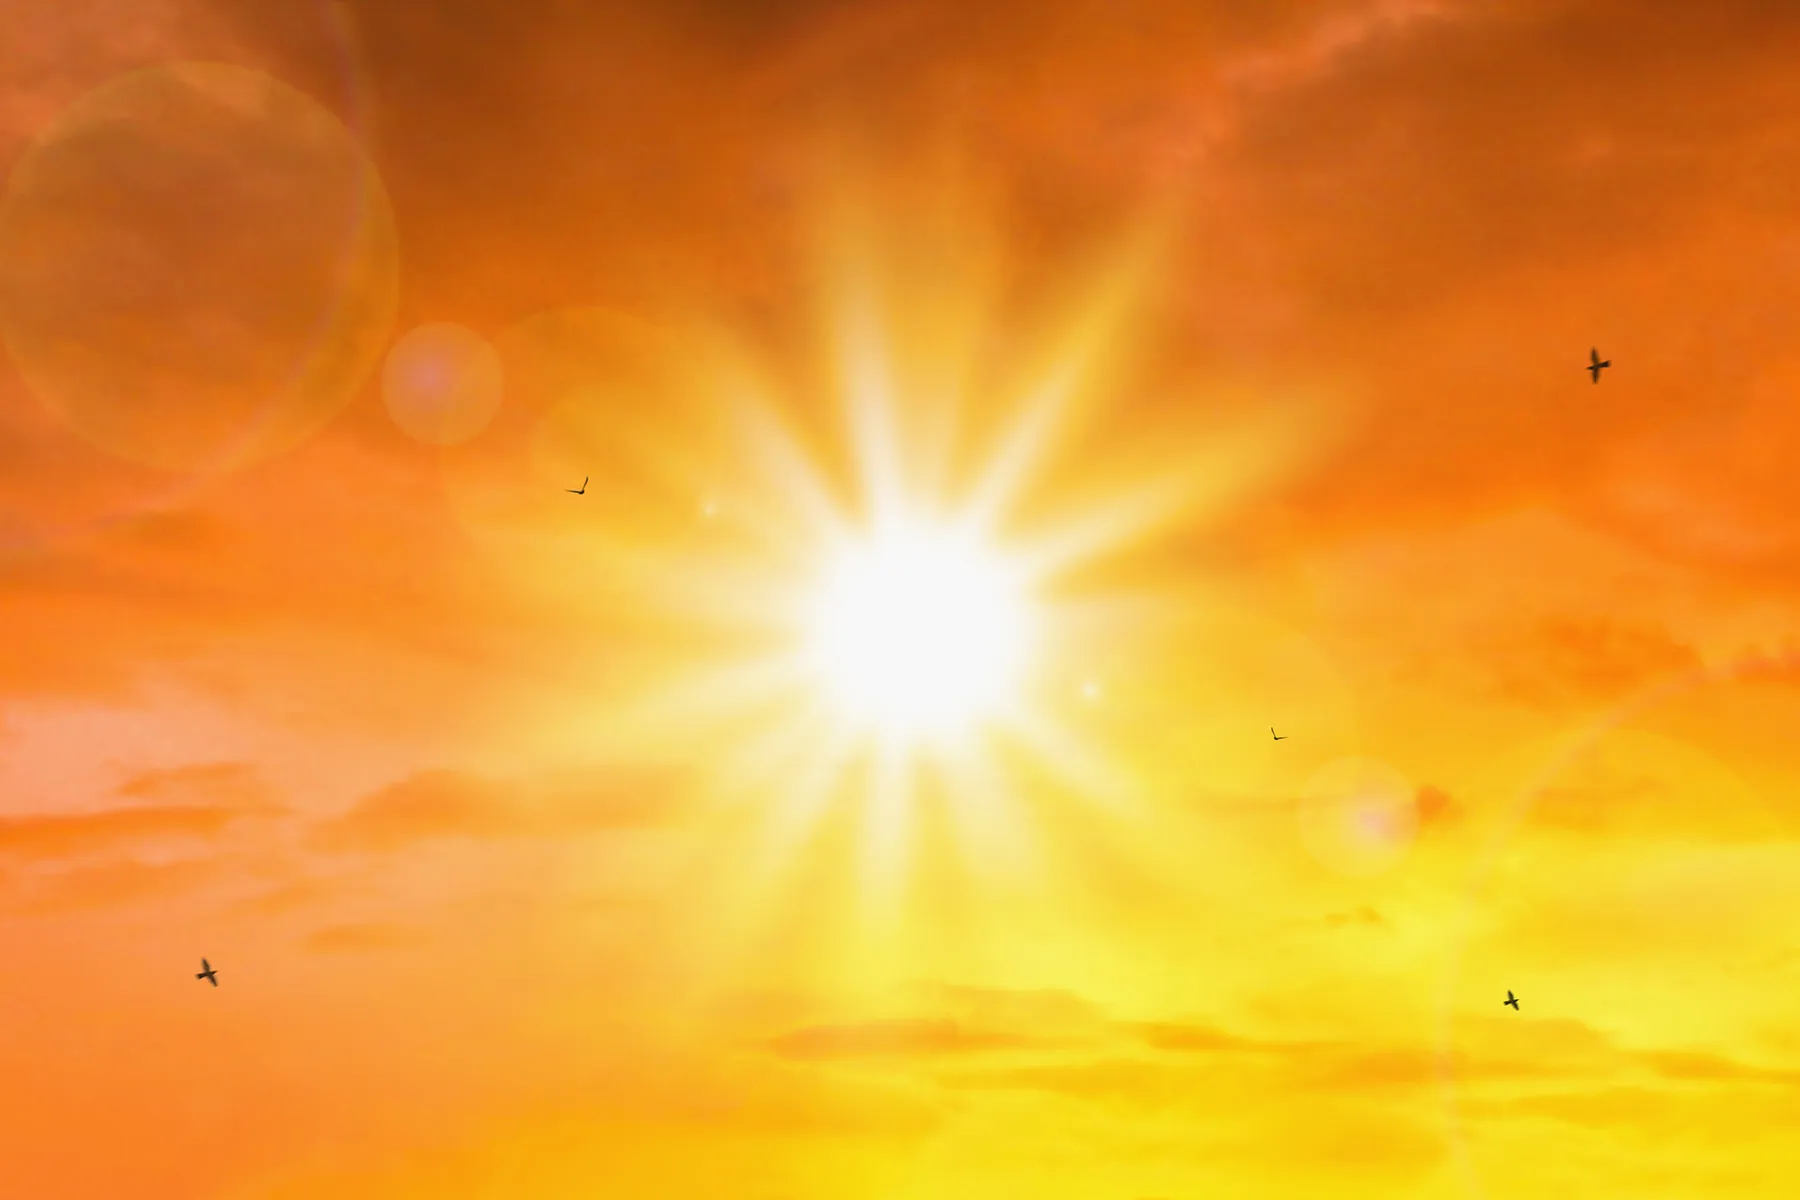 Late Summer Heat May Bring Increased Risk of Miscarriage